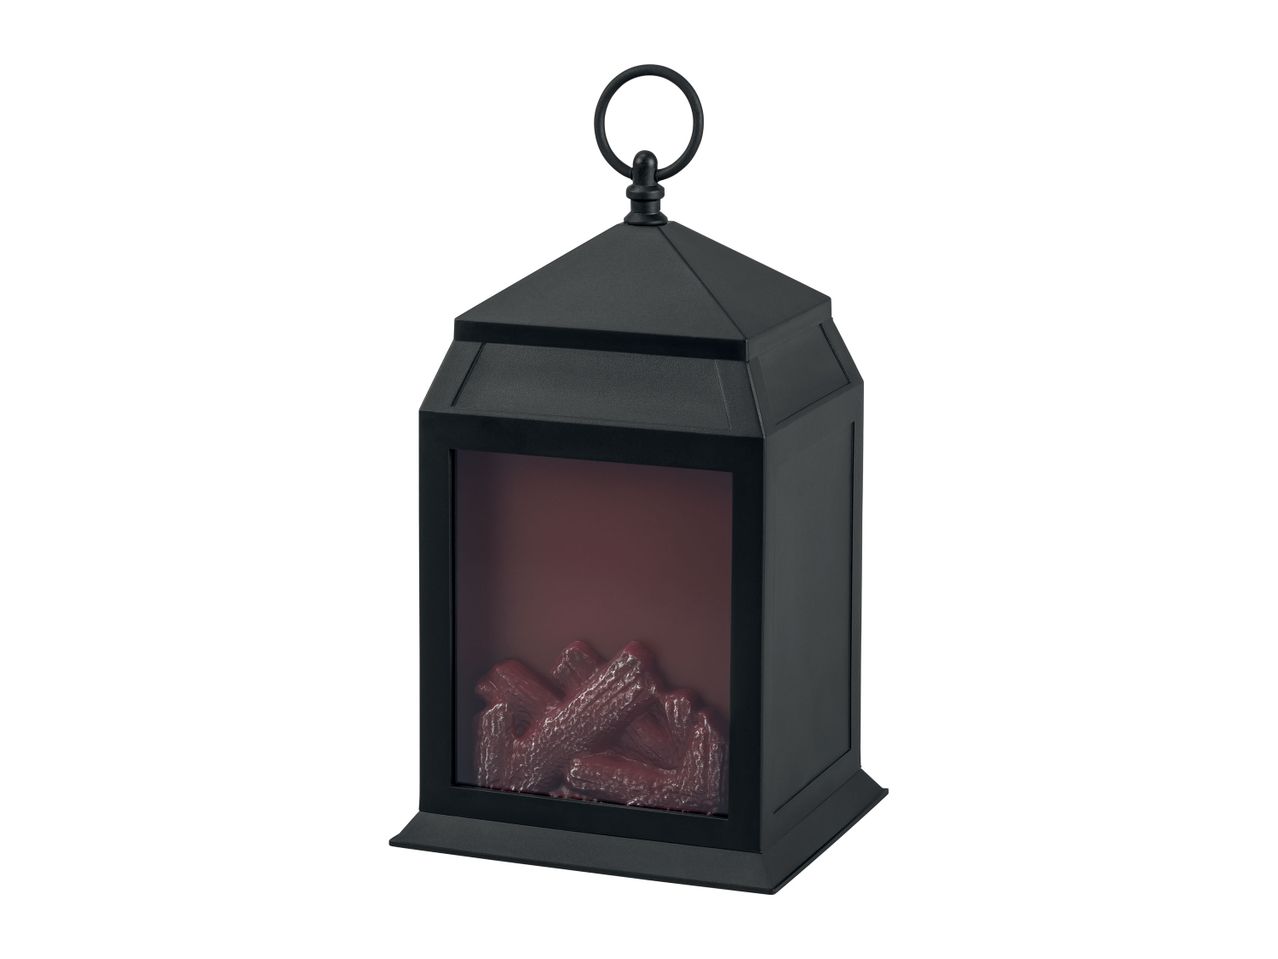 Go to full screen view: Livarno Home Battery Operated LED Fireplace Style Lantern - Image 7